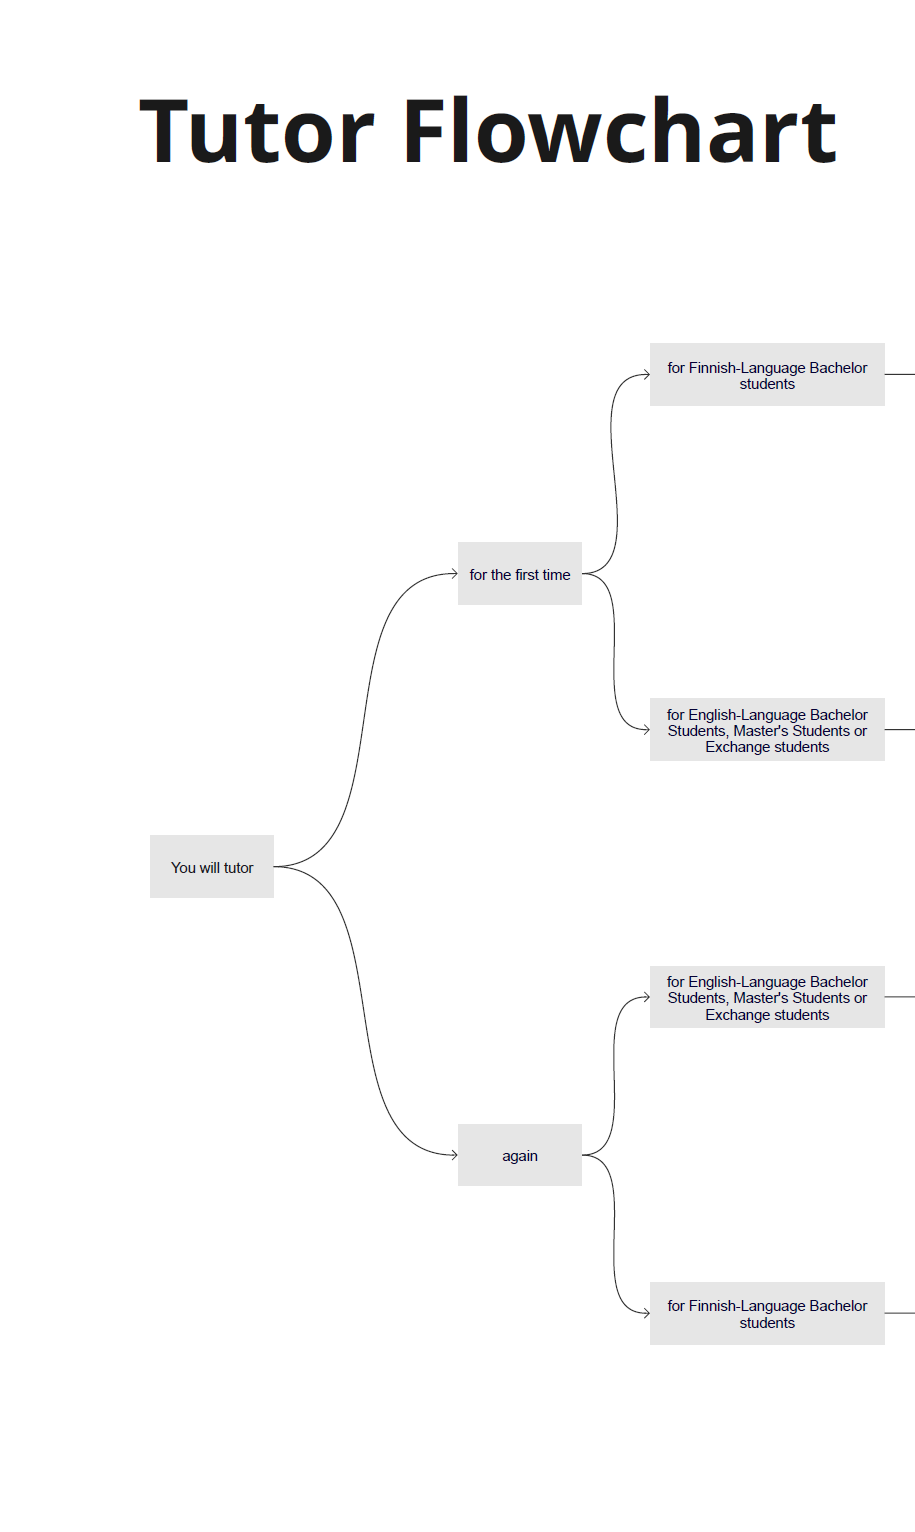 Tutor Flowchart diagram - the beginning of the actual tutor flow chart. Please open the flow chart pdf to view the full map.